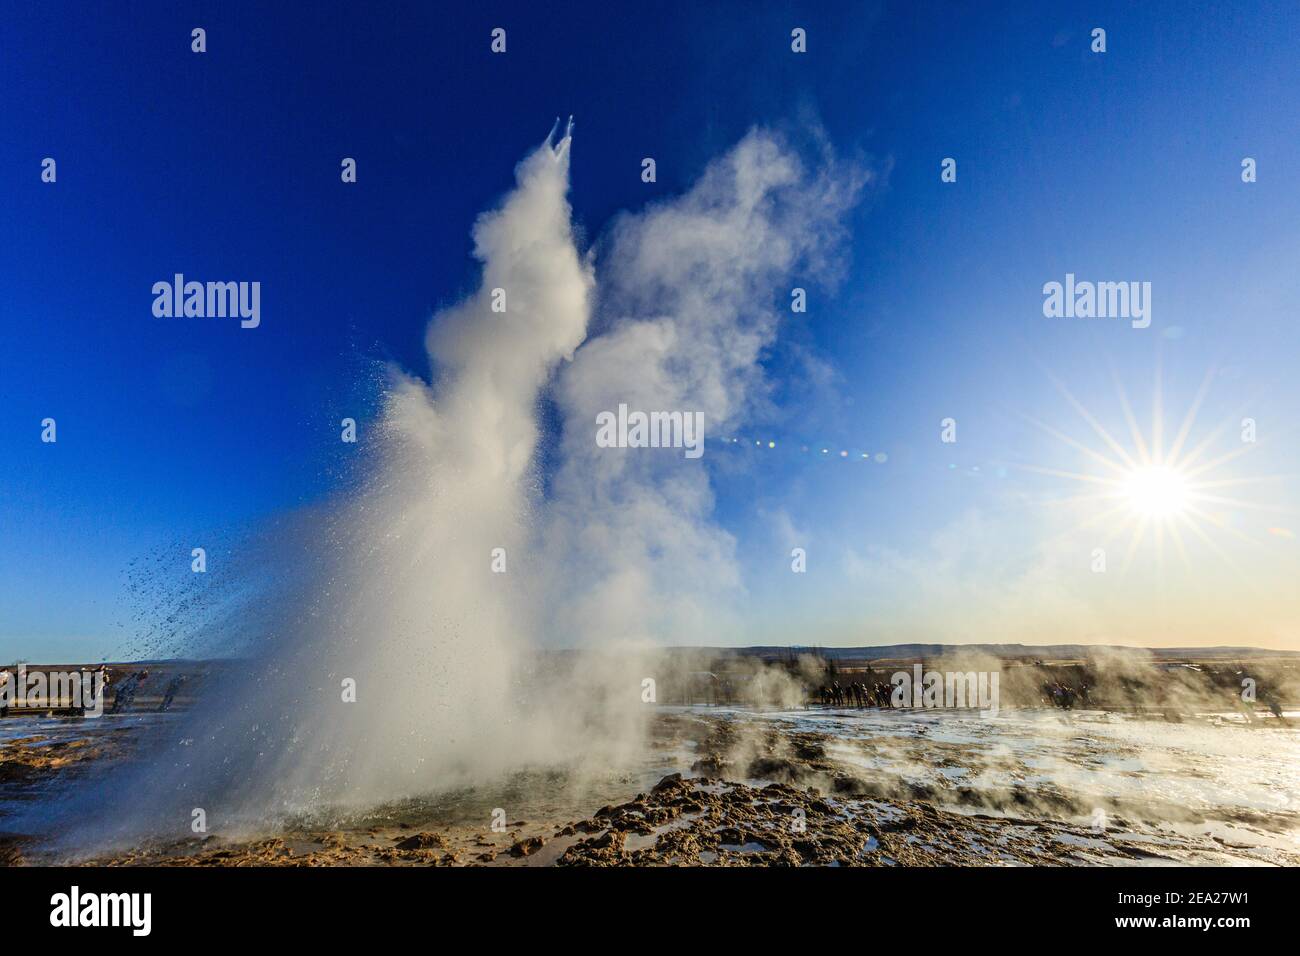 Eruption of the geyser Strokkur, geothermal area Haukadalur, Golden Circle, South Iceland, Iceland Stock Photo